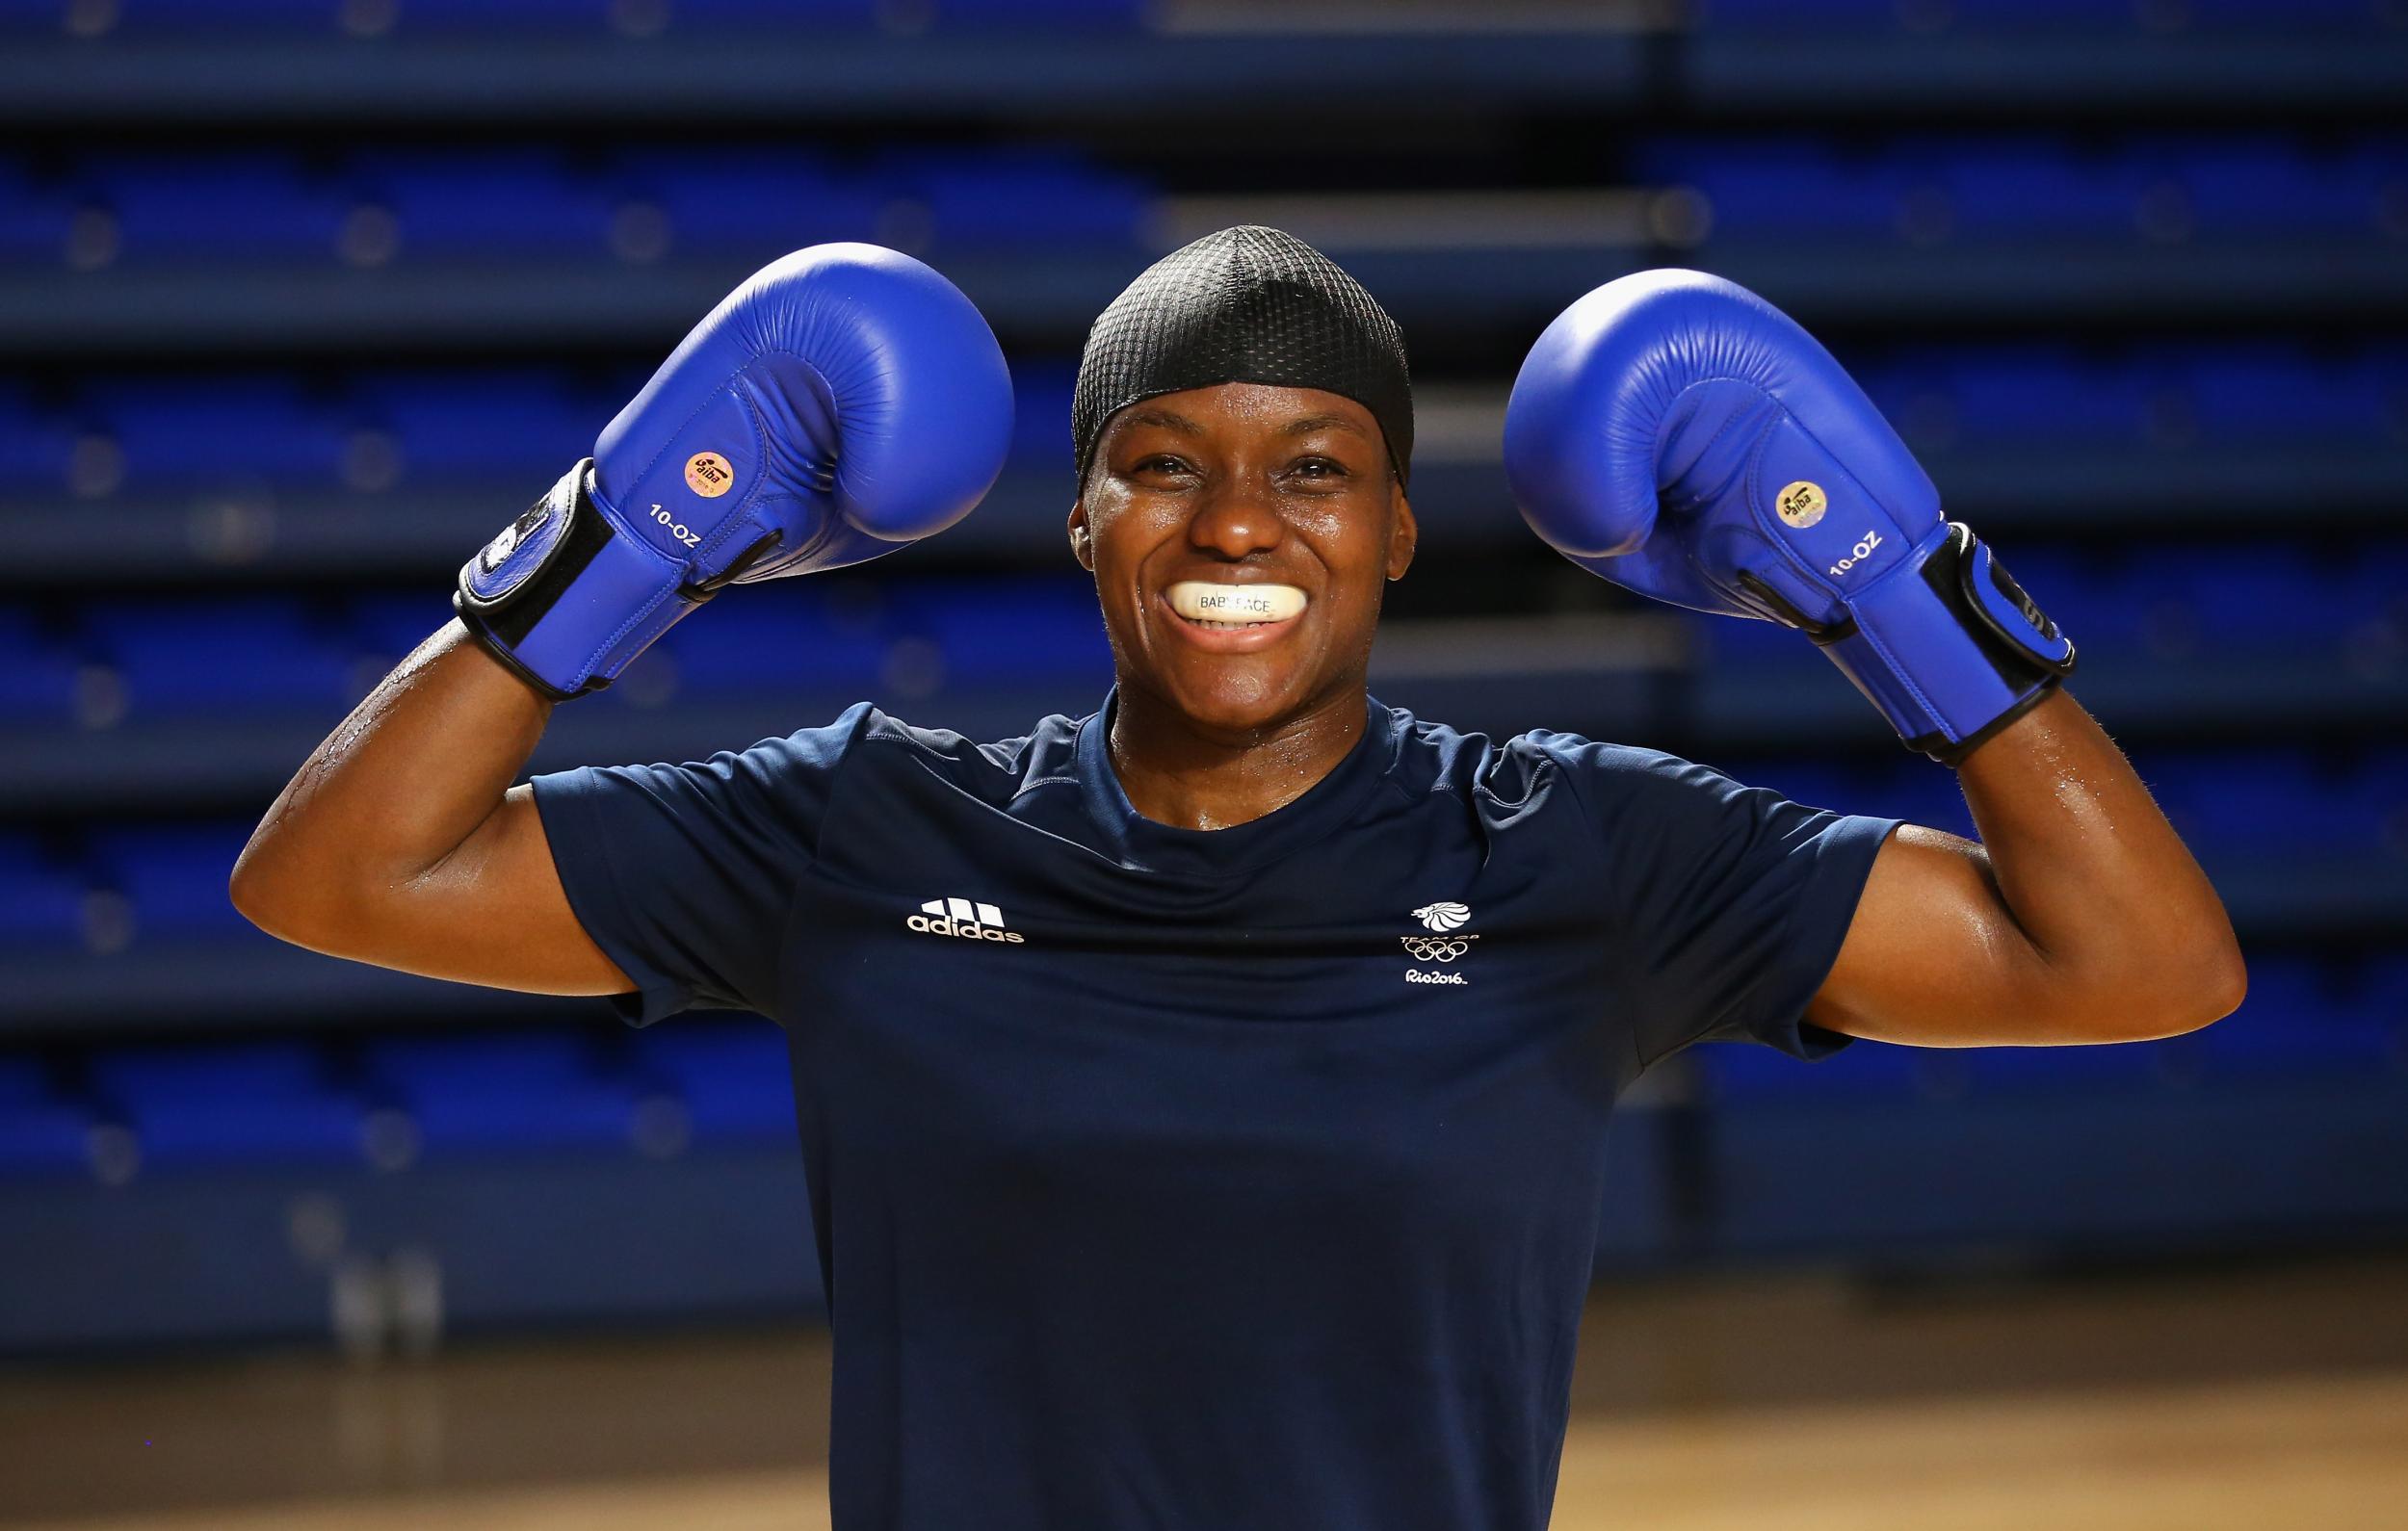 Rio 2016 Nicola Adams looks to make history as she prepares for 2012 title defence at Olympic Games The Independent The Independent photo